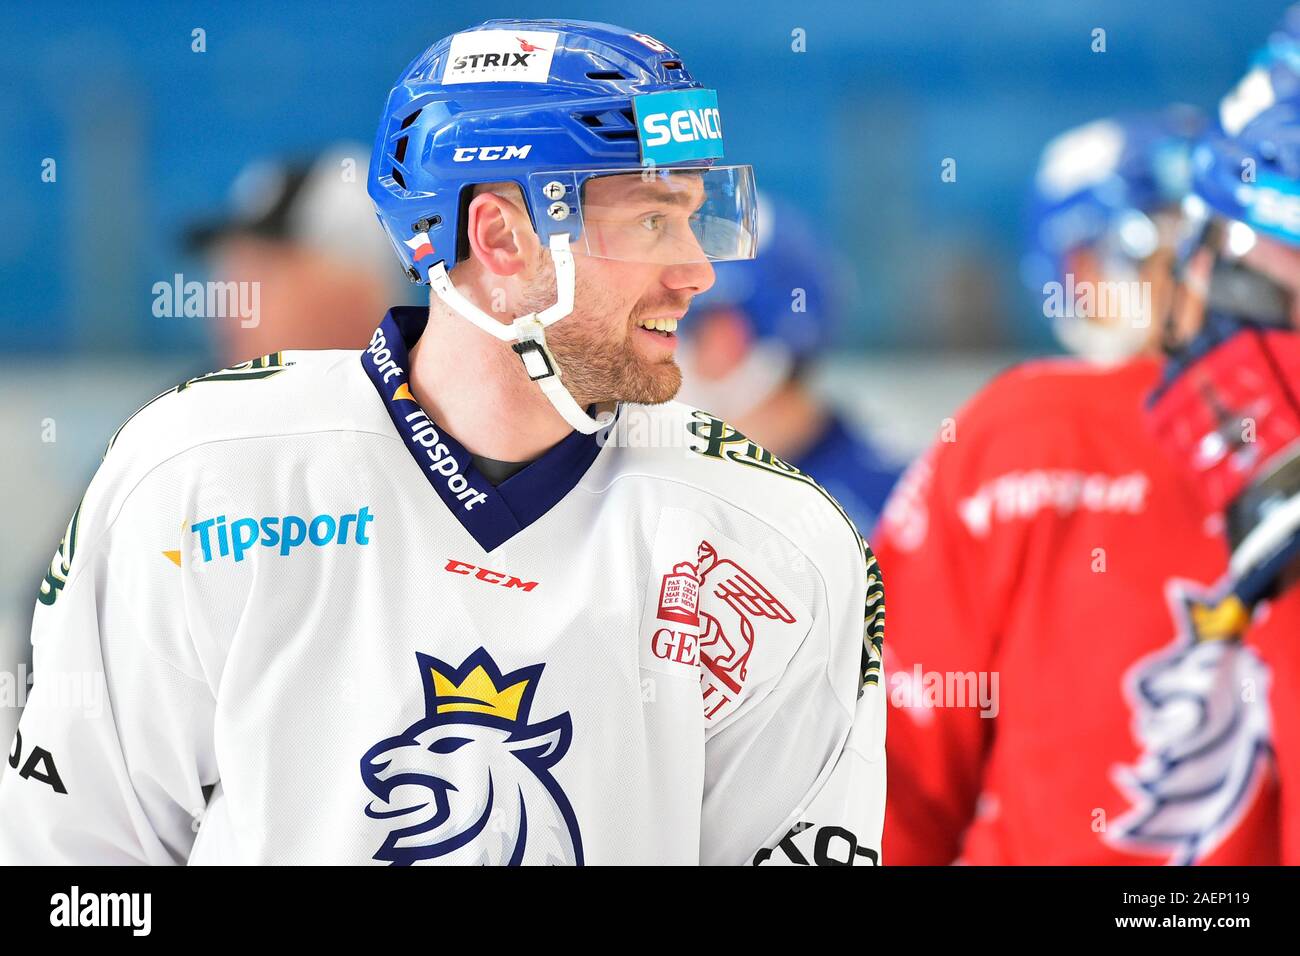 Pilsen, Czech Republic. 10th Dec, 2019. Czech hockey players in action during the training session prior to match Czech Republic vs Finland; ice-hockey Channel One Cup game, part of Euro Hockey Tour in Plzen, Czech Republic, December 10, 2019. Credit: Miroslav Chaloupka/CTK Photo/Alamy Live News Stock Photo